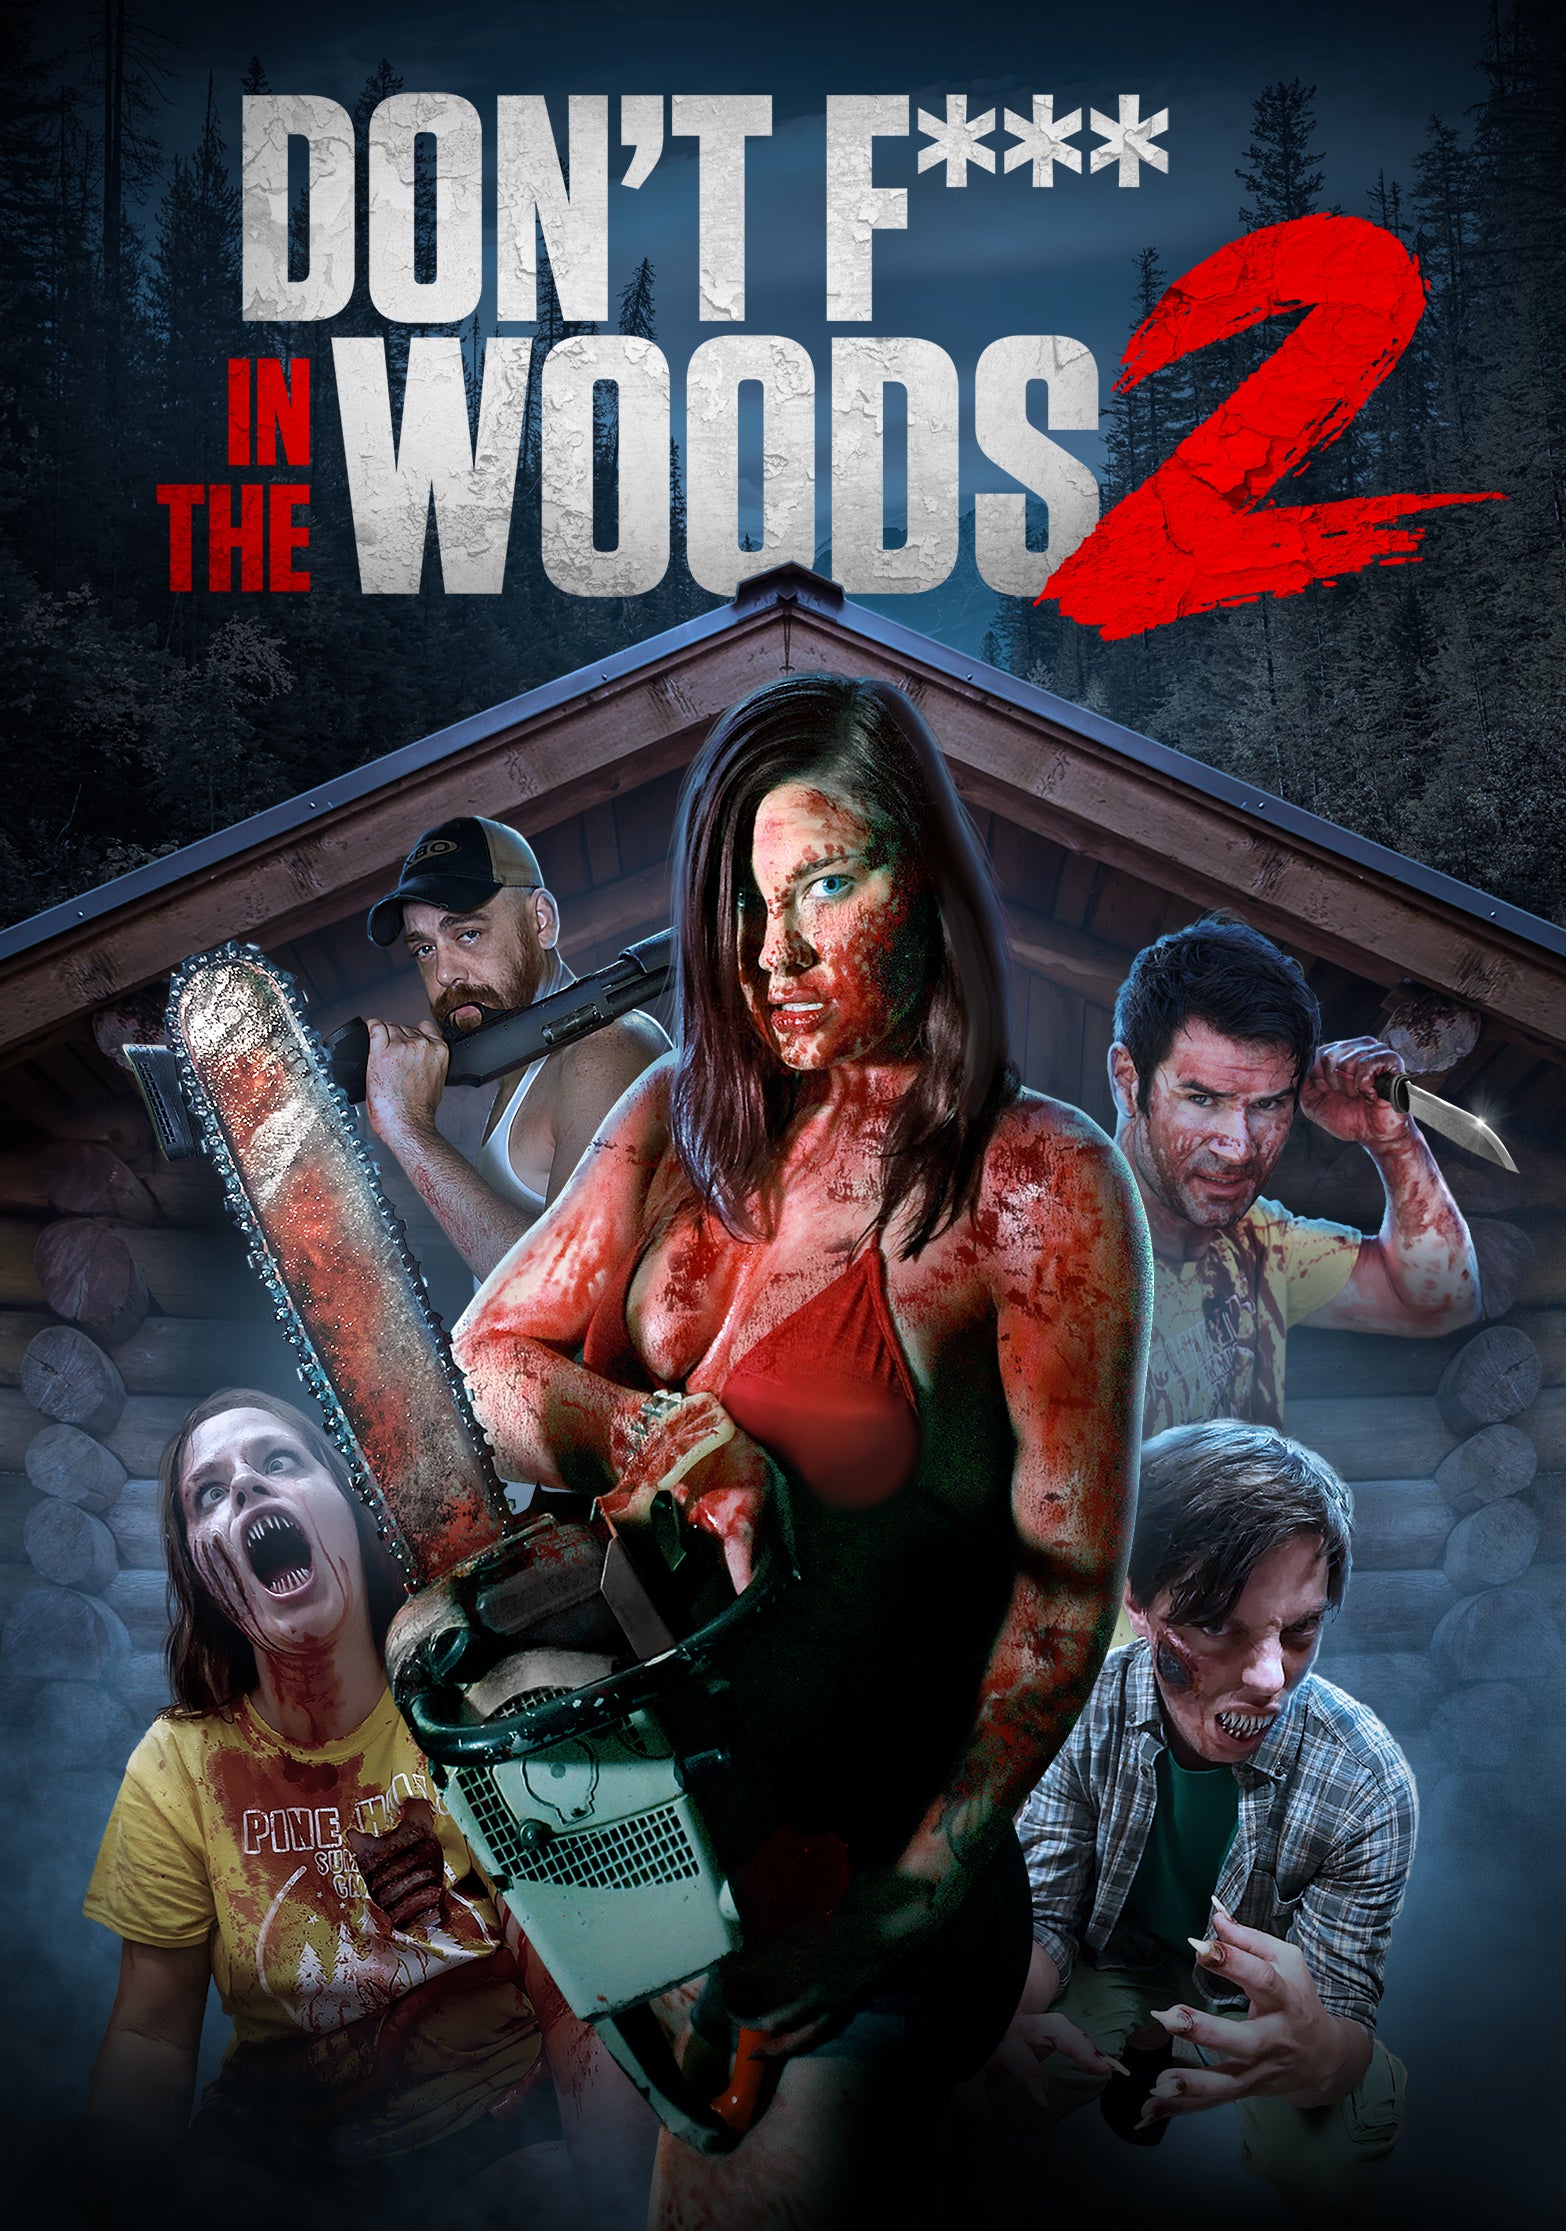 DON'T FUCK IN THE WOODS 2 DVD